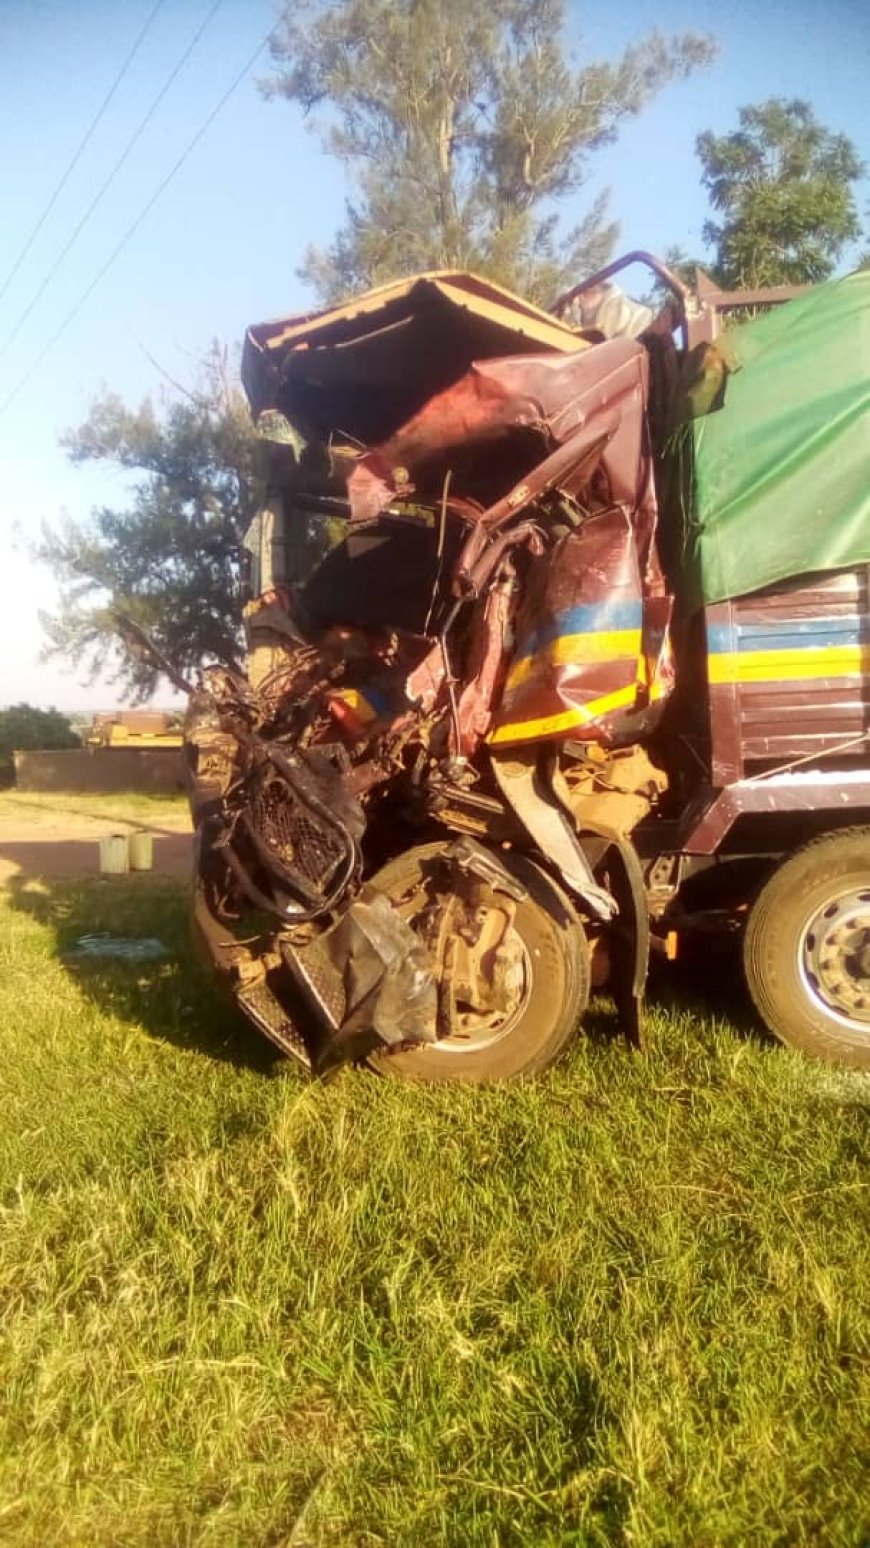 Uganda Prison Driver Loses Control, Dies on Spot in a Motor Vehicle Accident.